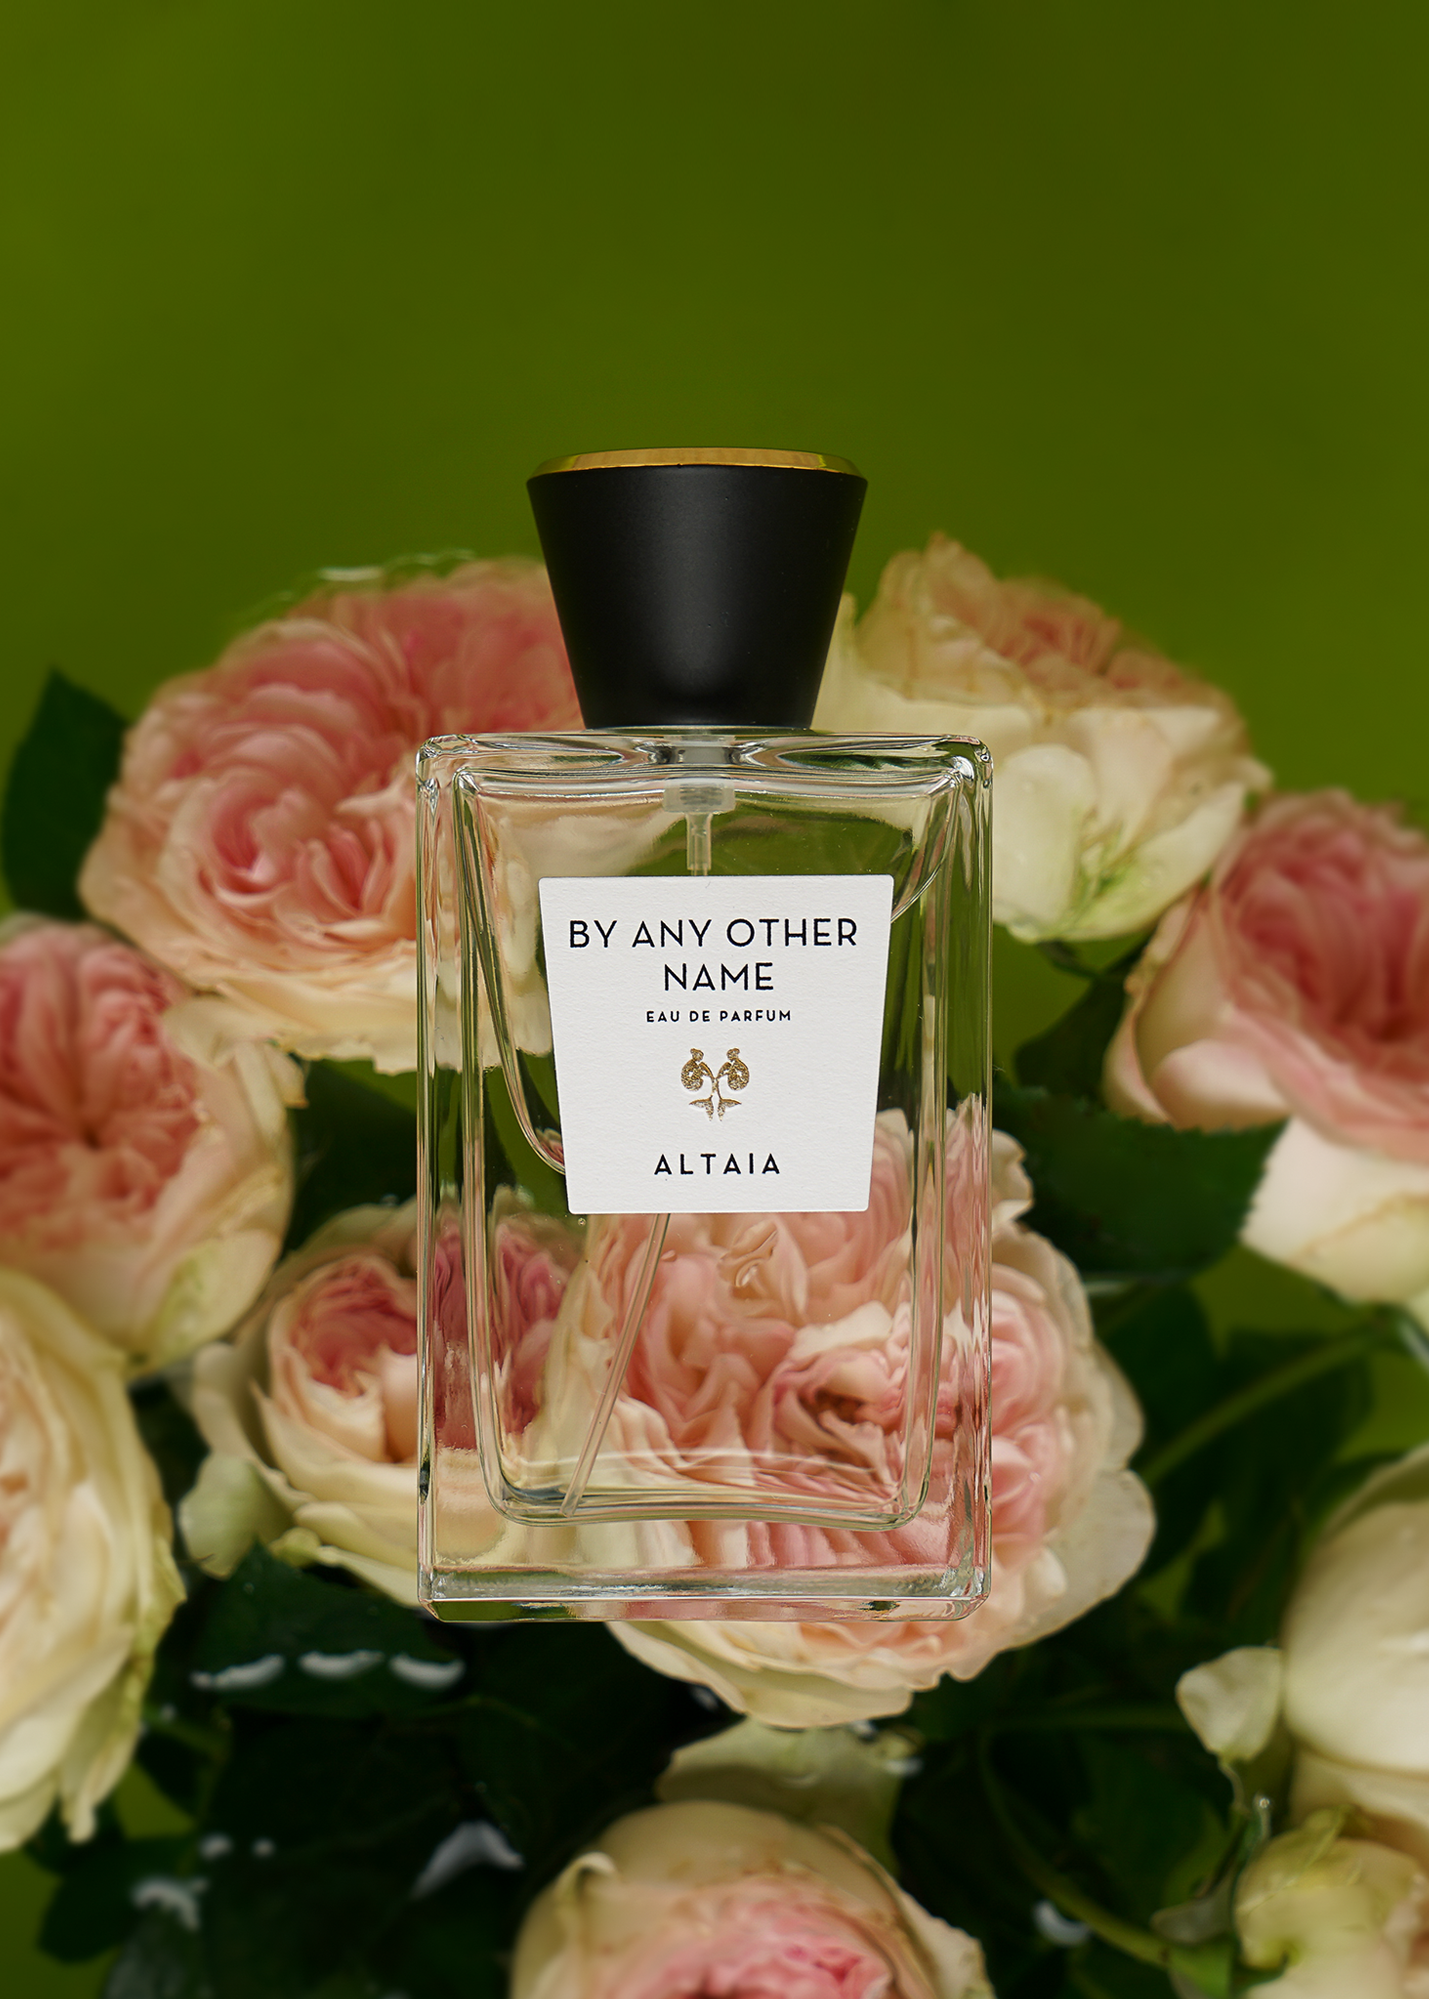 BY ANY OTHER NAME EAU DE PARFUM